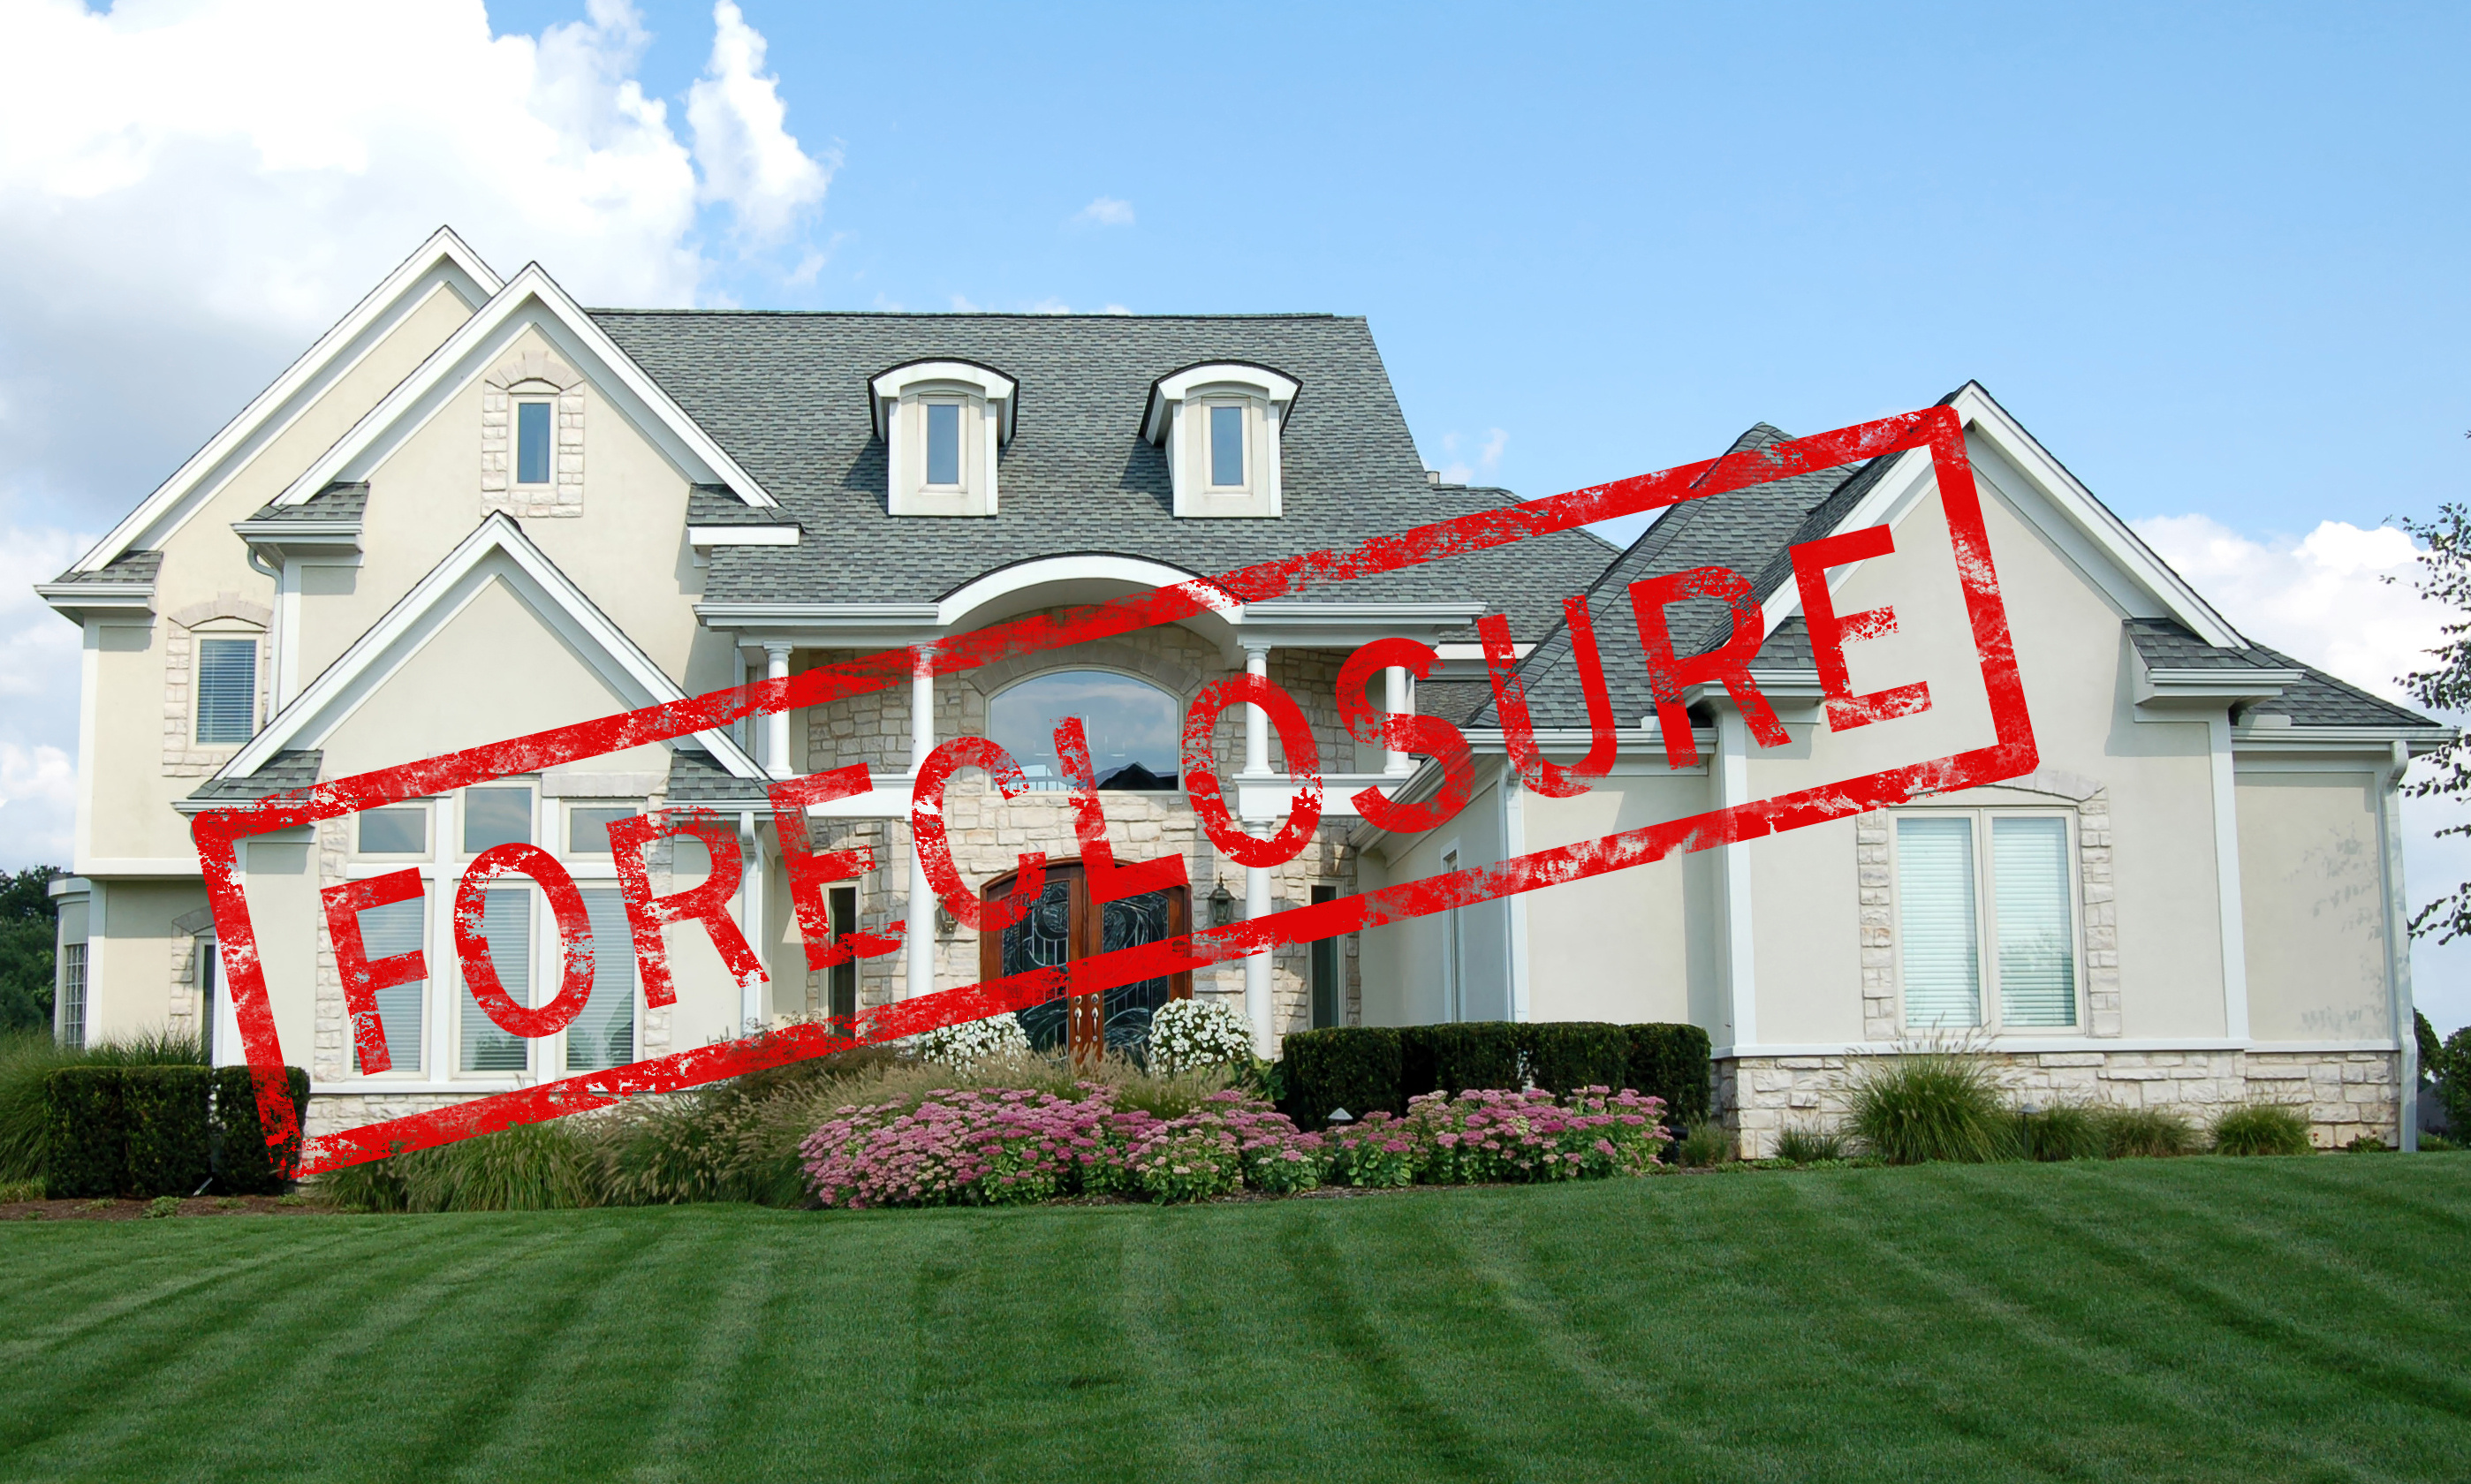 Call Hill Appraisal Associates, LLC to discuss valuations on Montgomery foreclosures